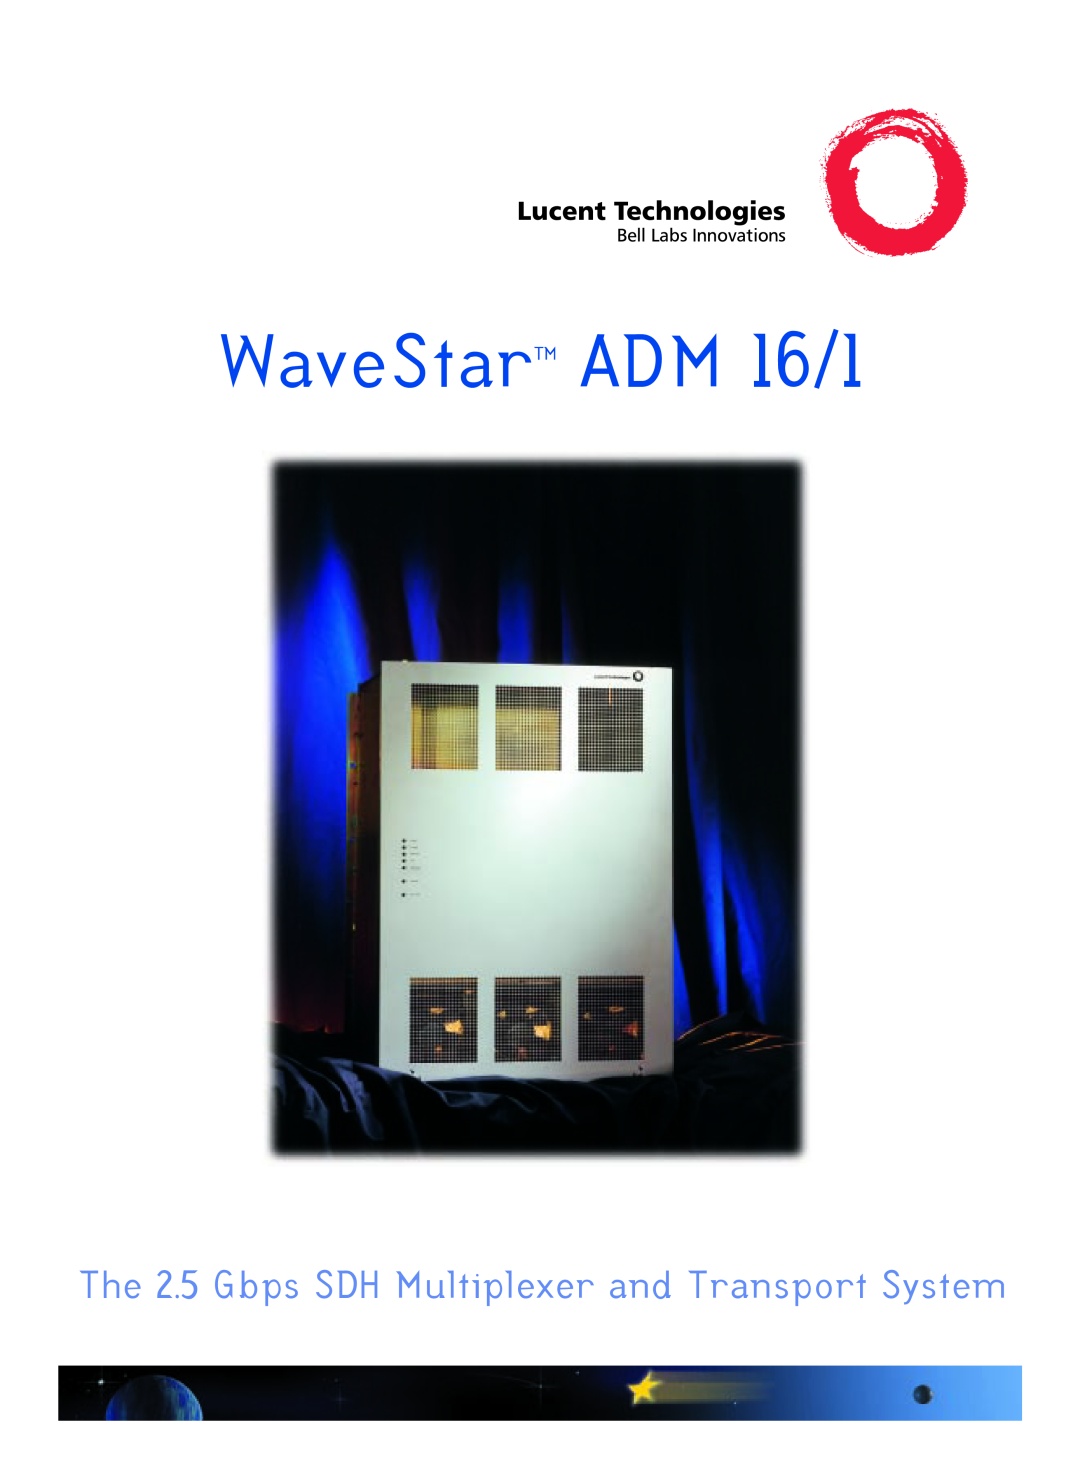 Lucent Technologies manual WaveStar ADM 16/1, The 2.5 Gbps SDH Multiplexer and Transport System 